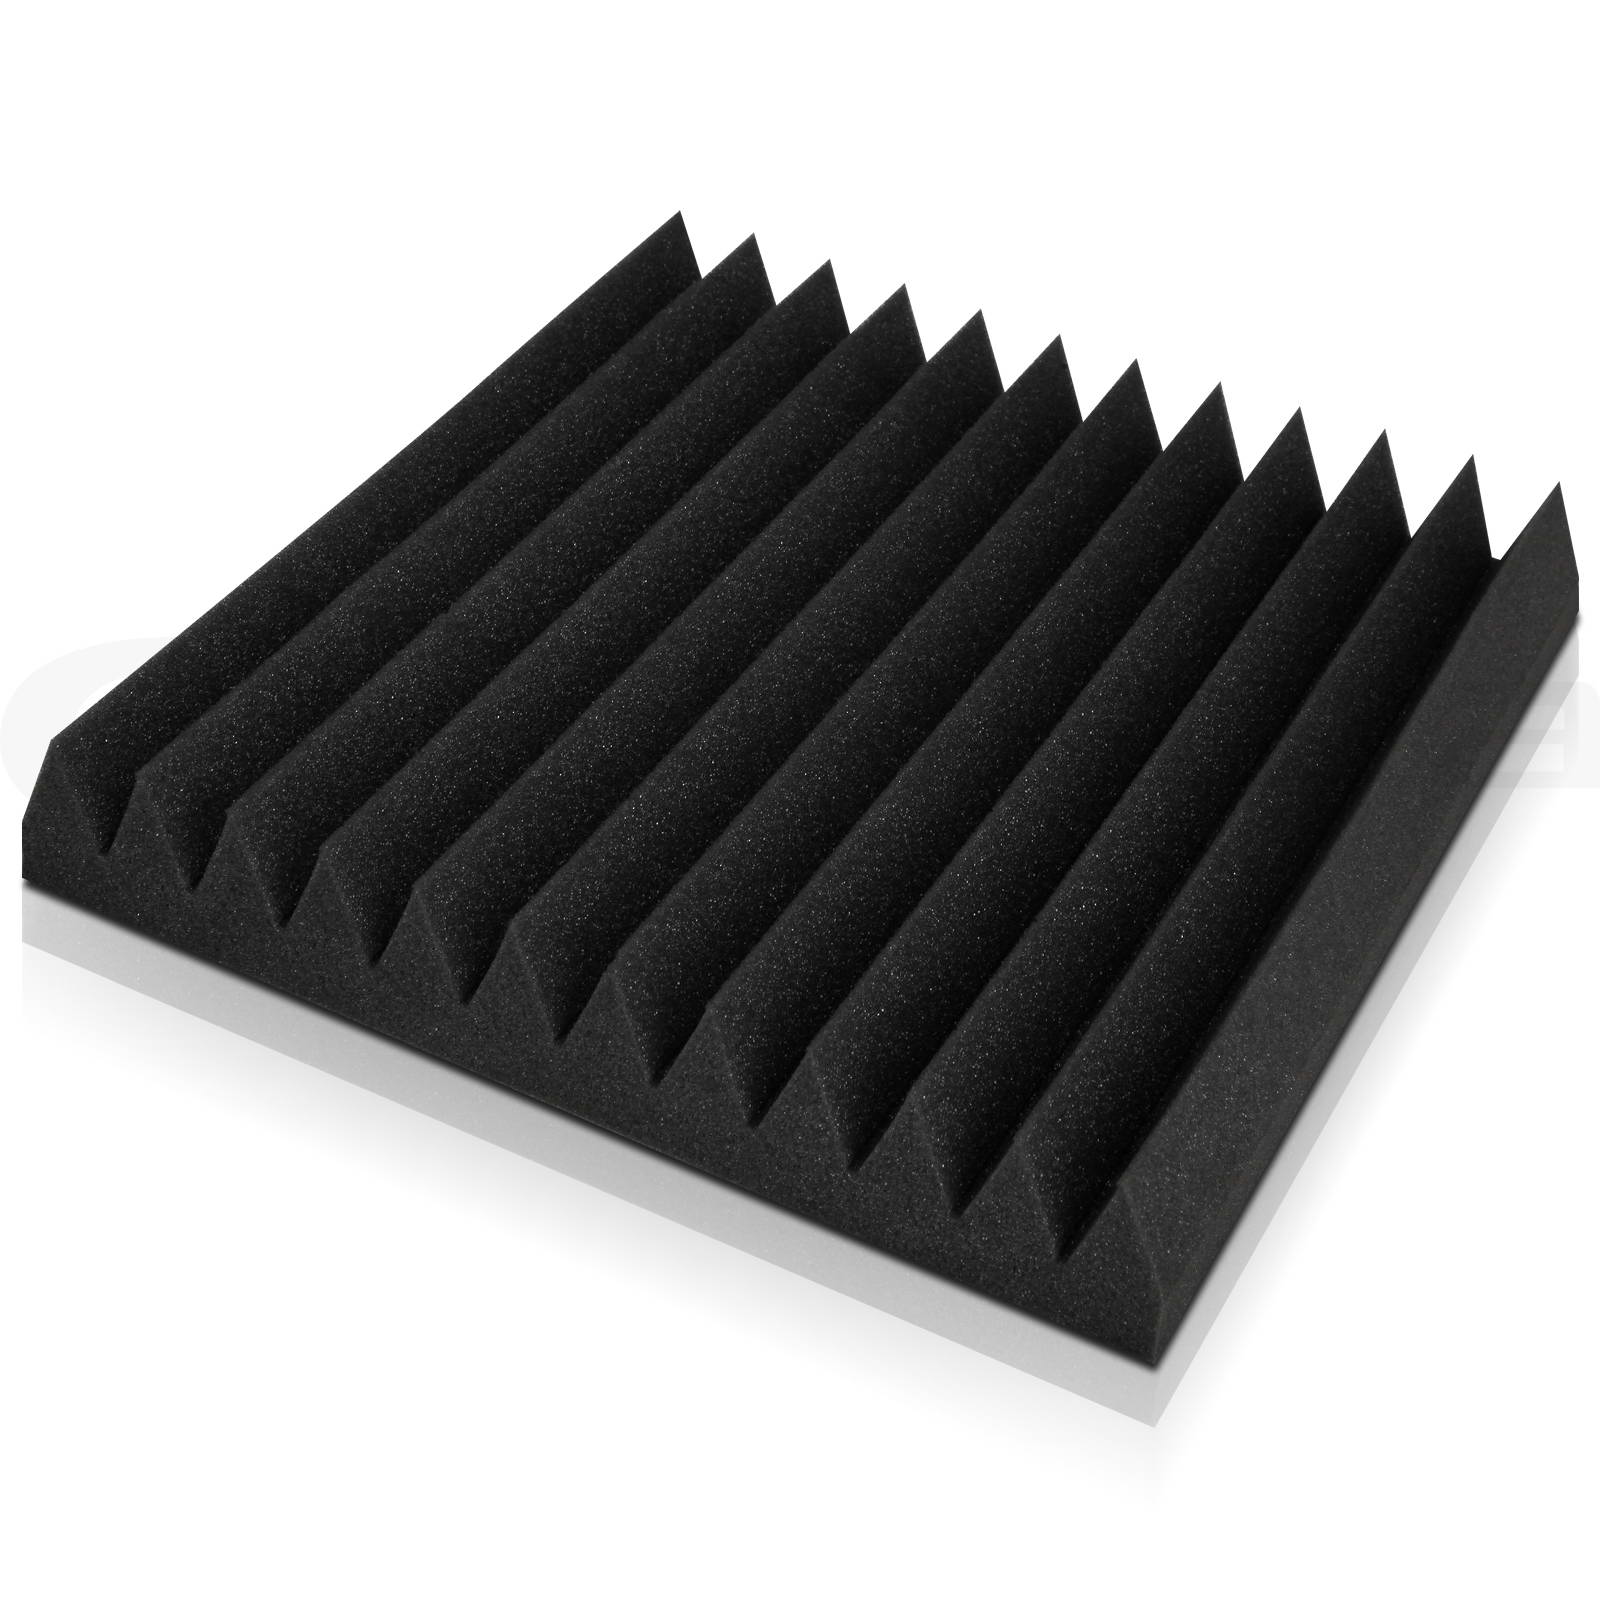 Alpha Studio Acoustic Foam Sound Absorbtion Proofing Panel Wedge ...